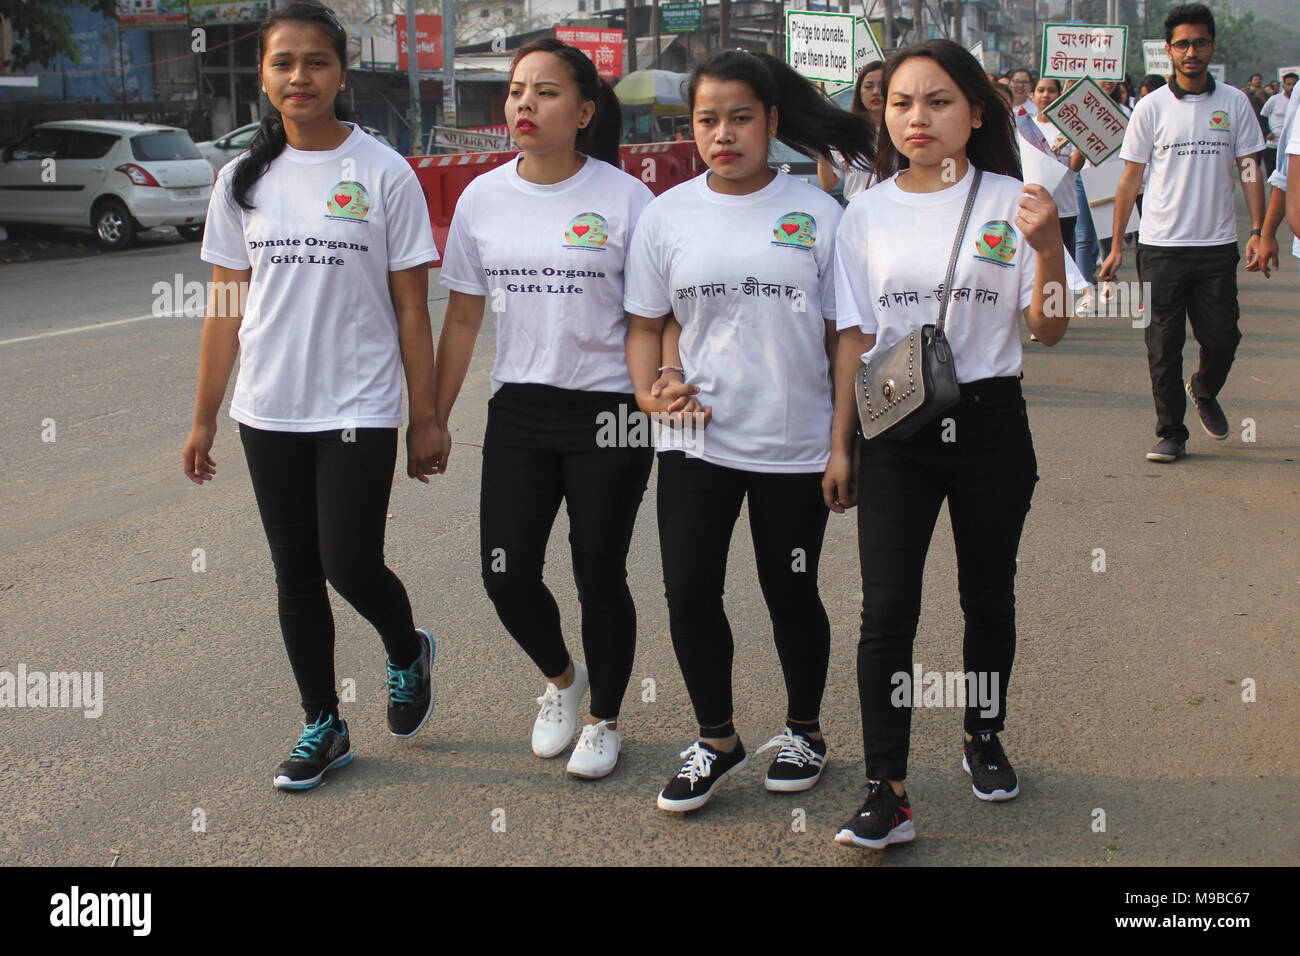 A step towards deceased organ nonation, Guwahati. participated in the walkathon with an aim to support the noble cause of organ donation oganised by Regional Organ Tissue Transplant Organisation (ROTTO